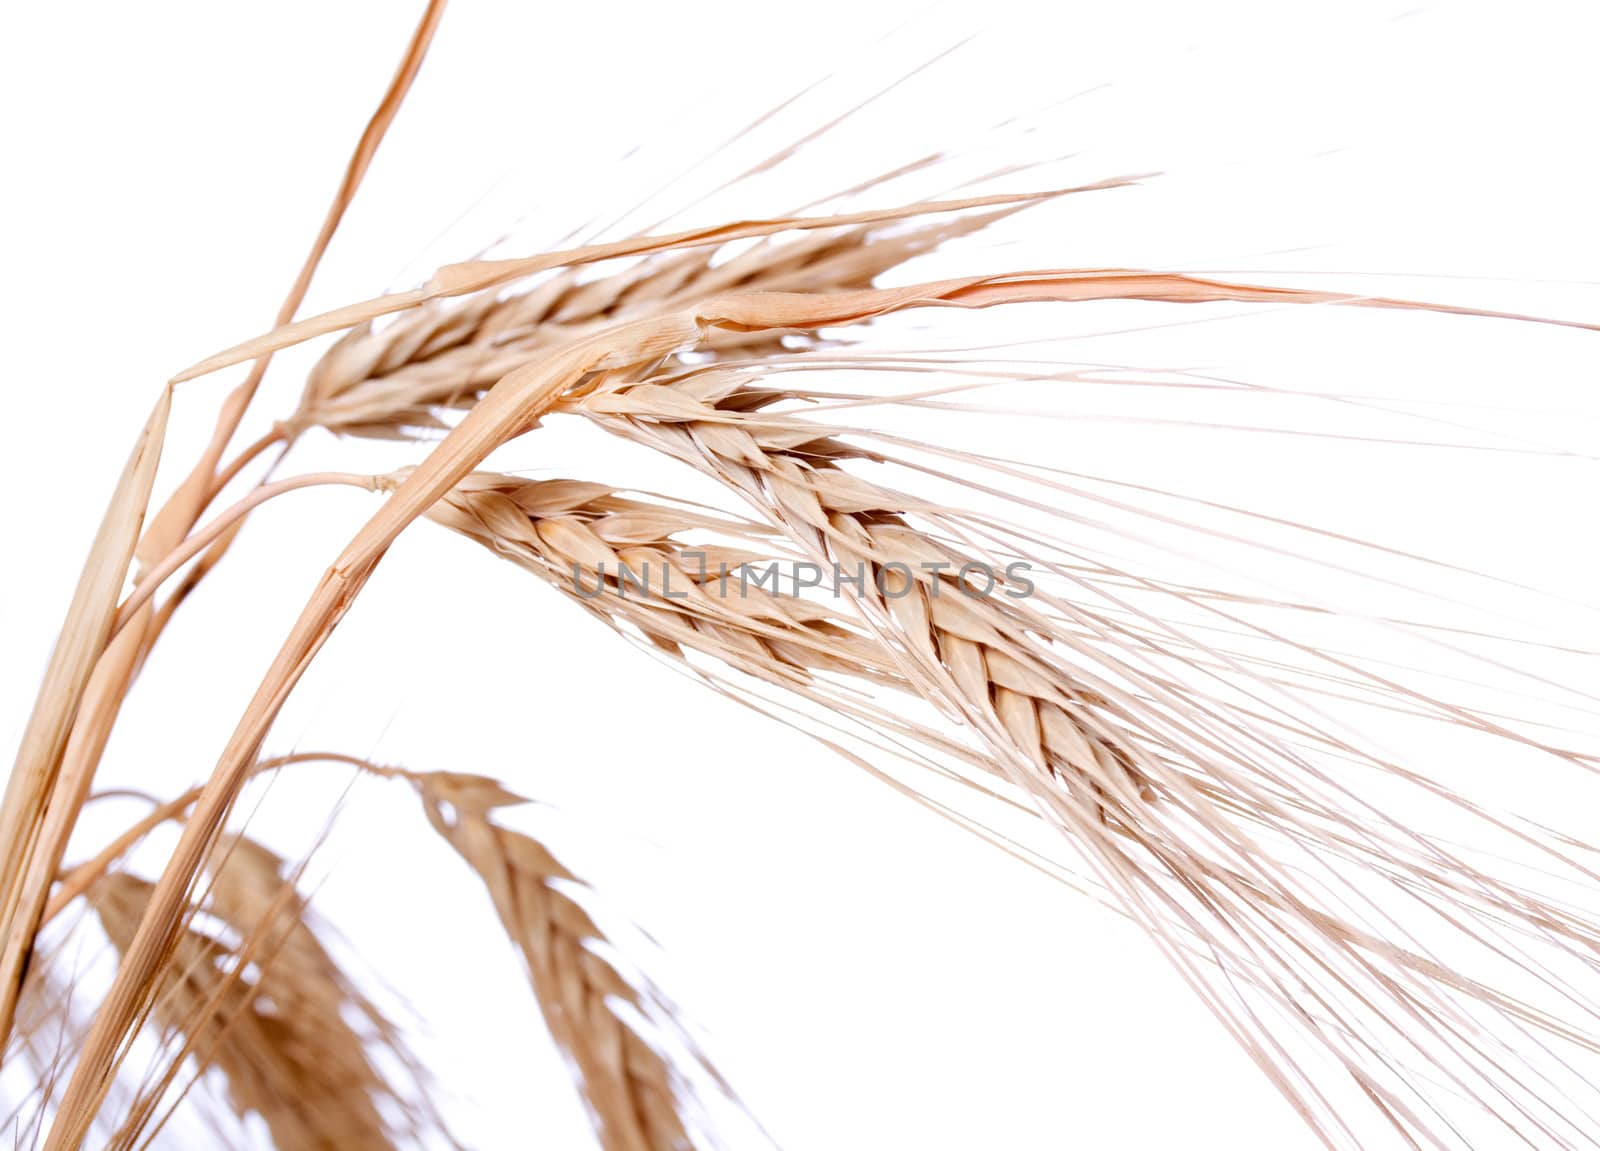 Isolated wheat ears on a white background.